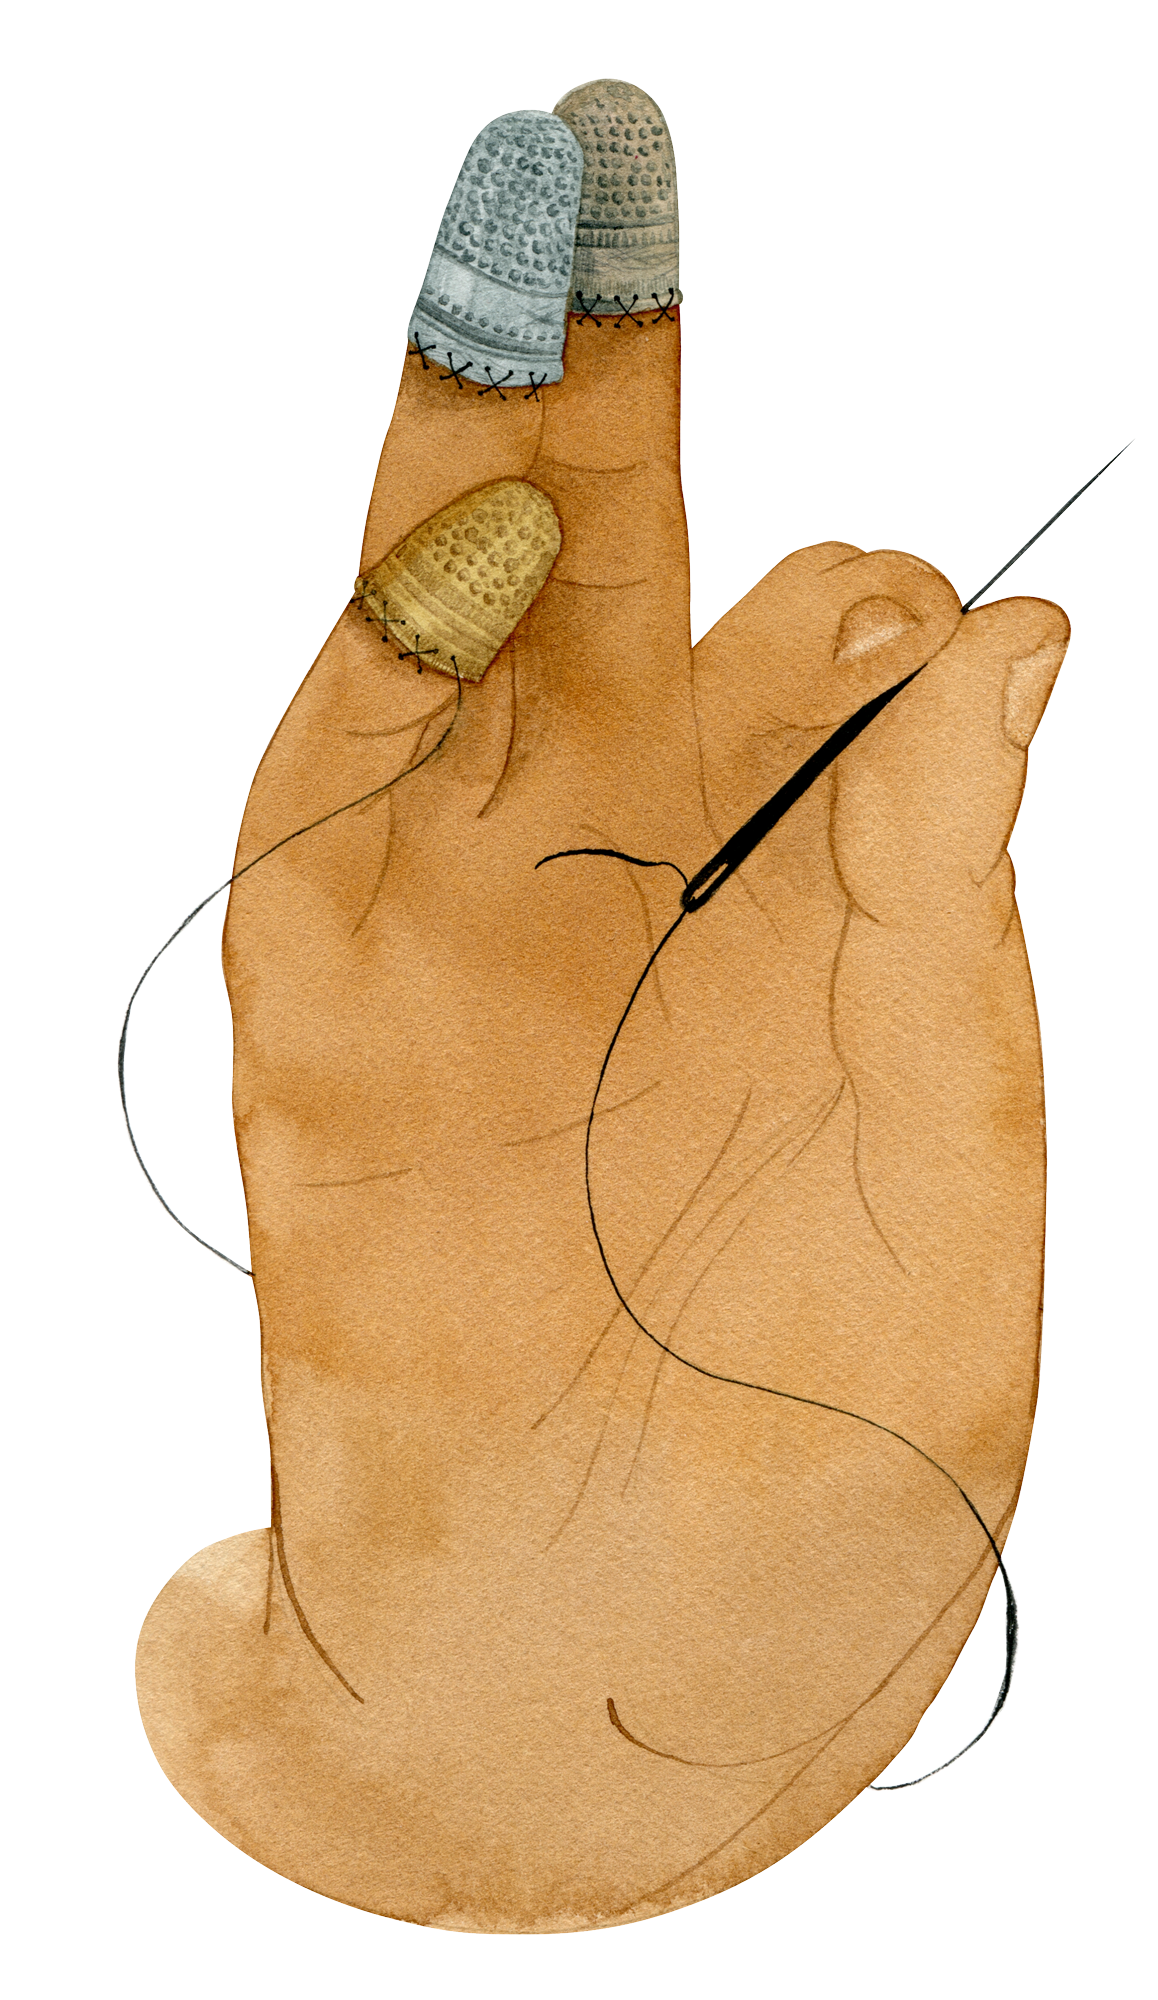 A hand with thimbles holding a needle and thread